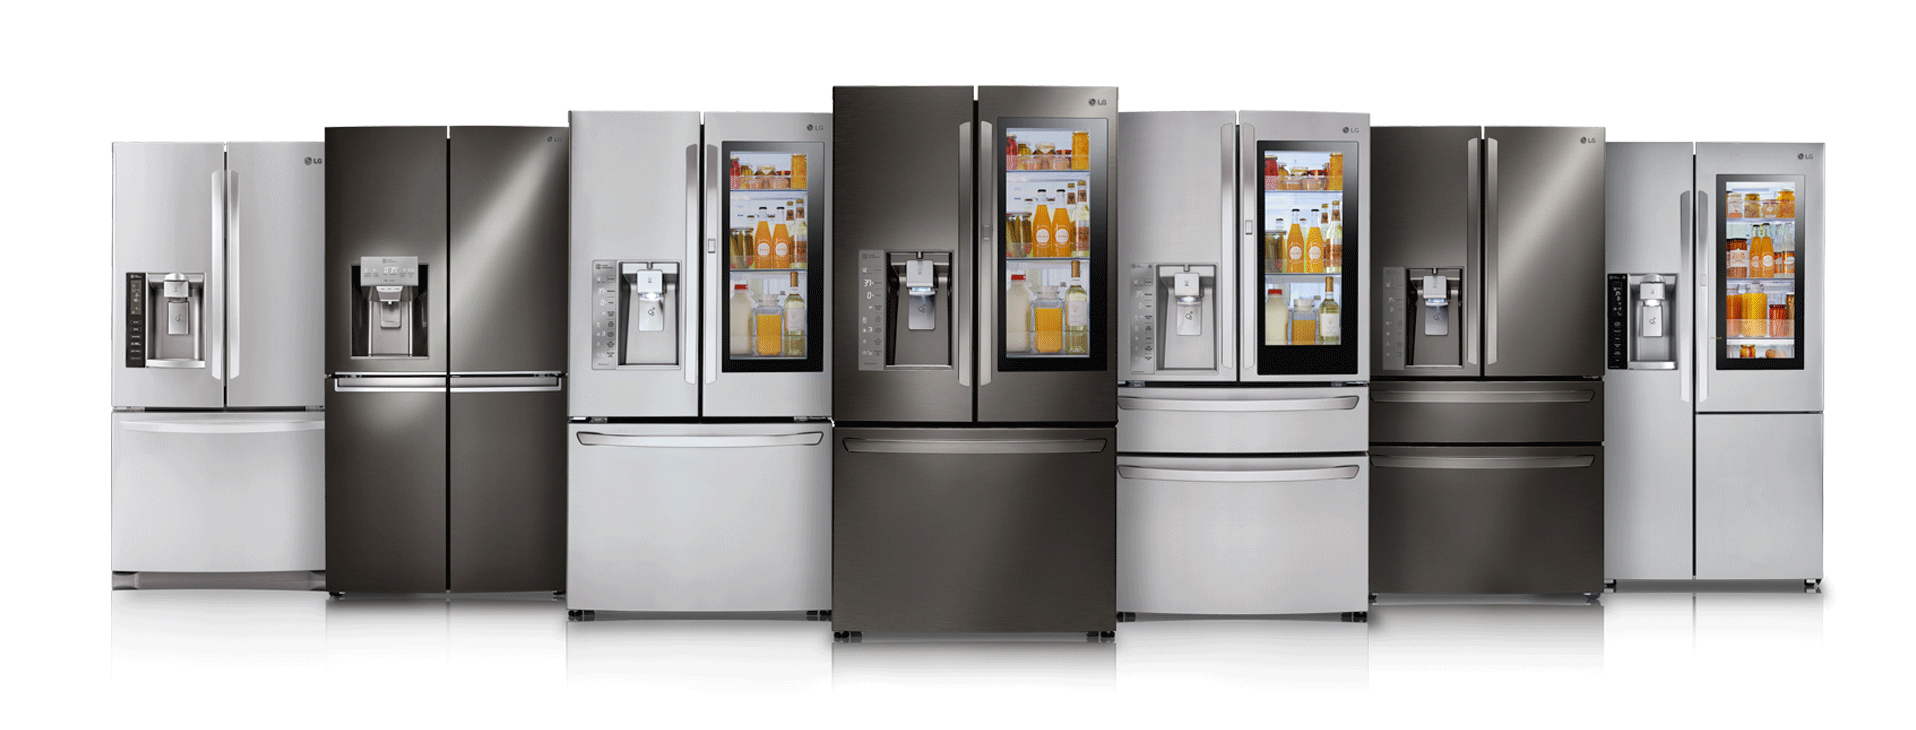 Lg Counter Depth Refrigerators Built In Look For Your Kitchen